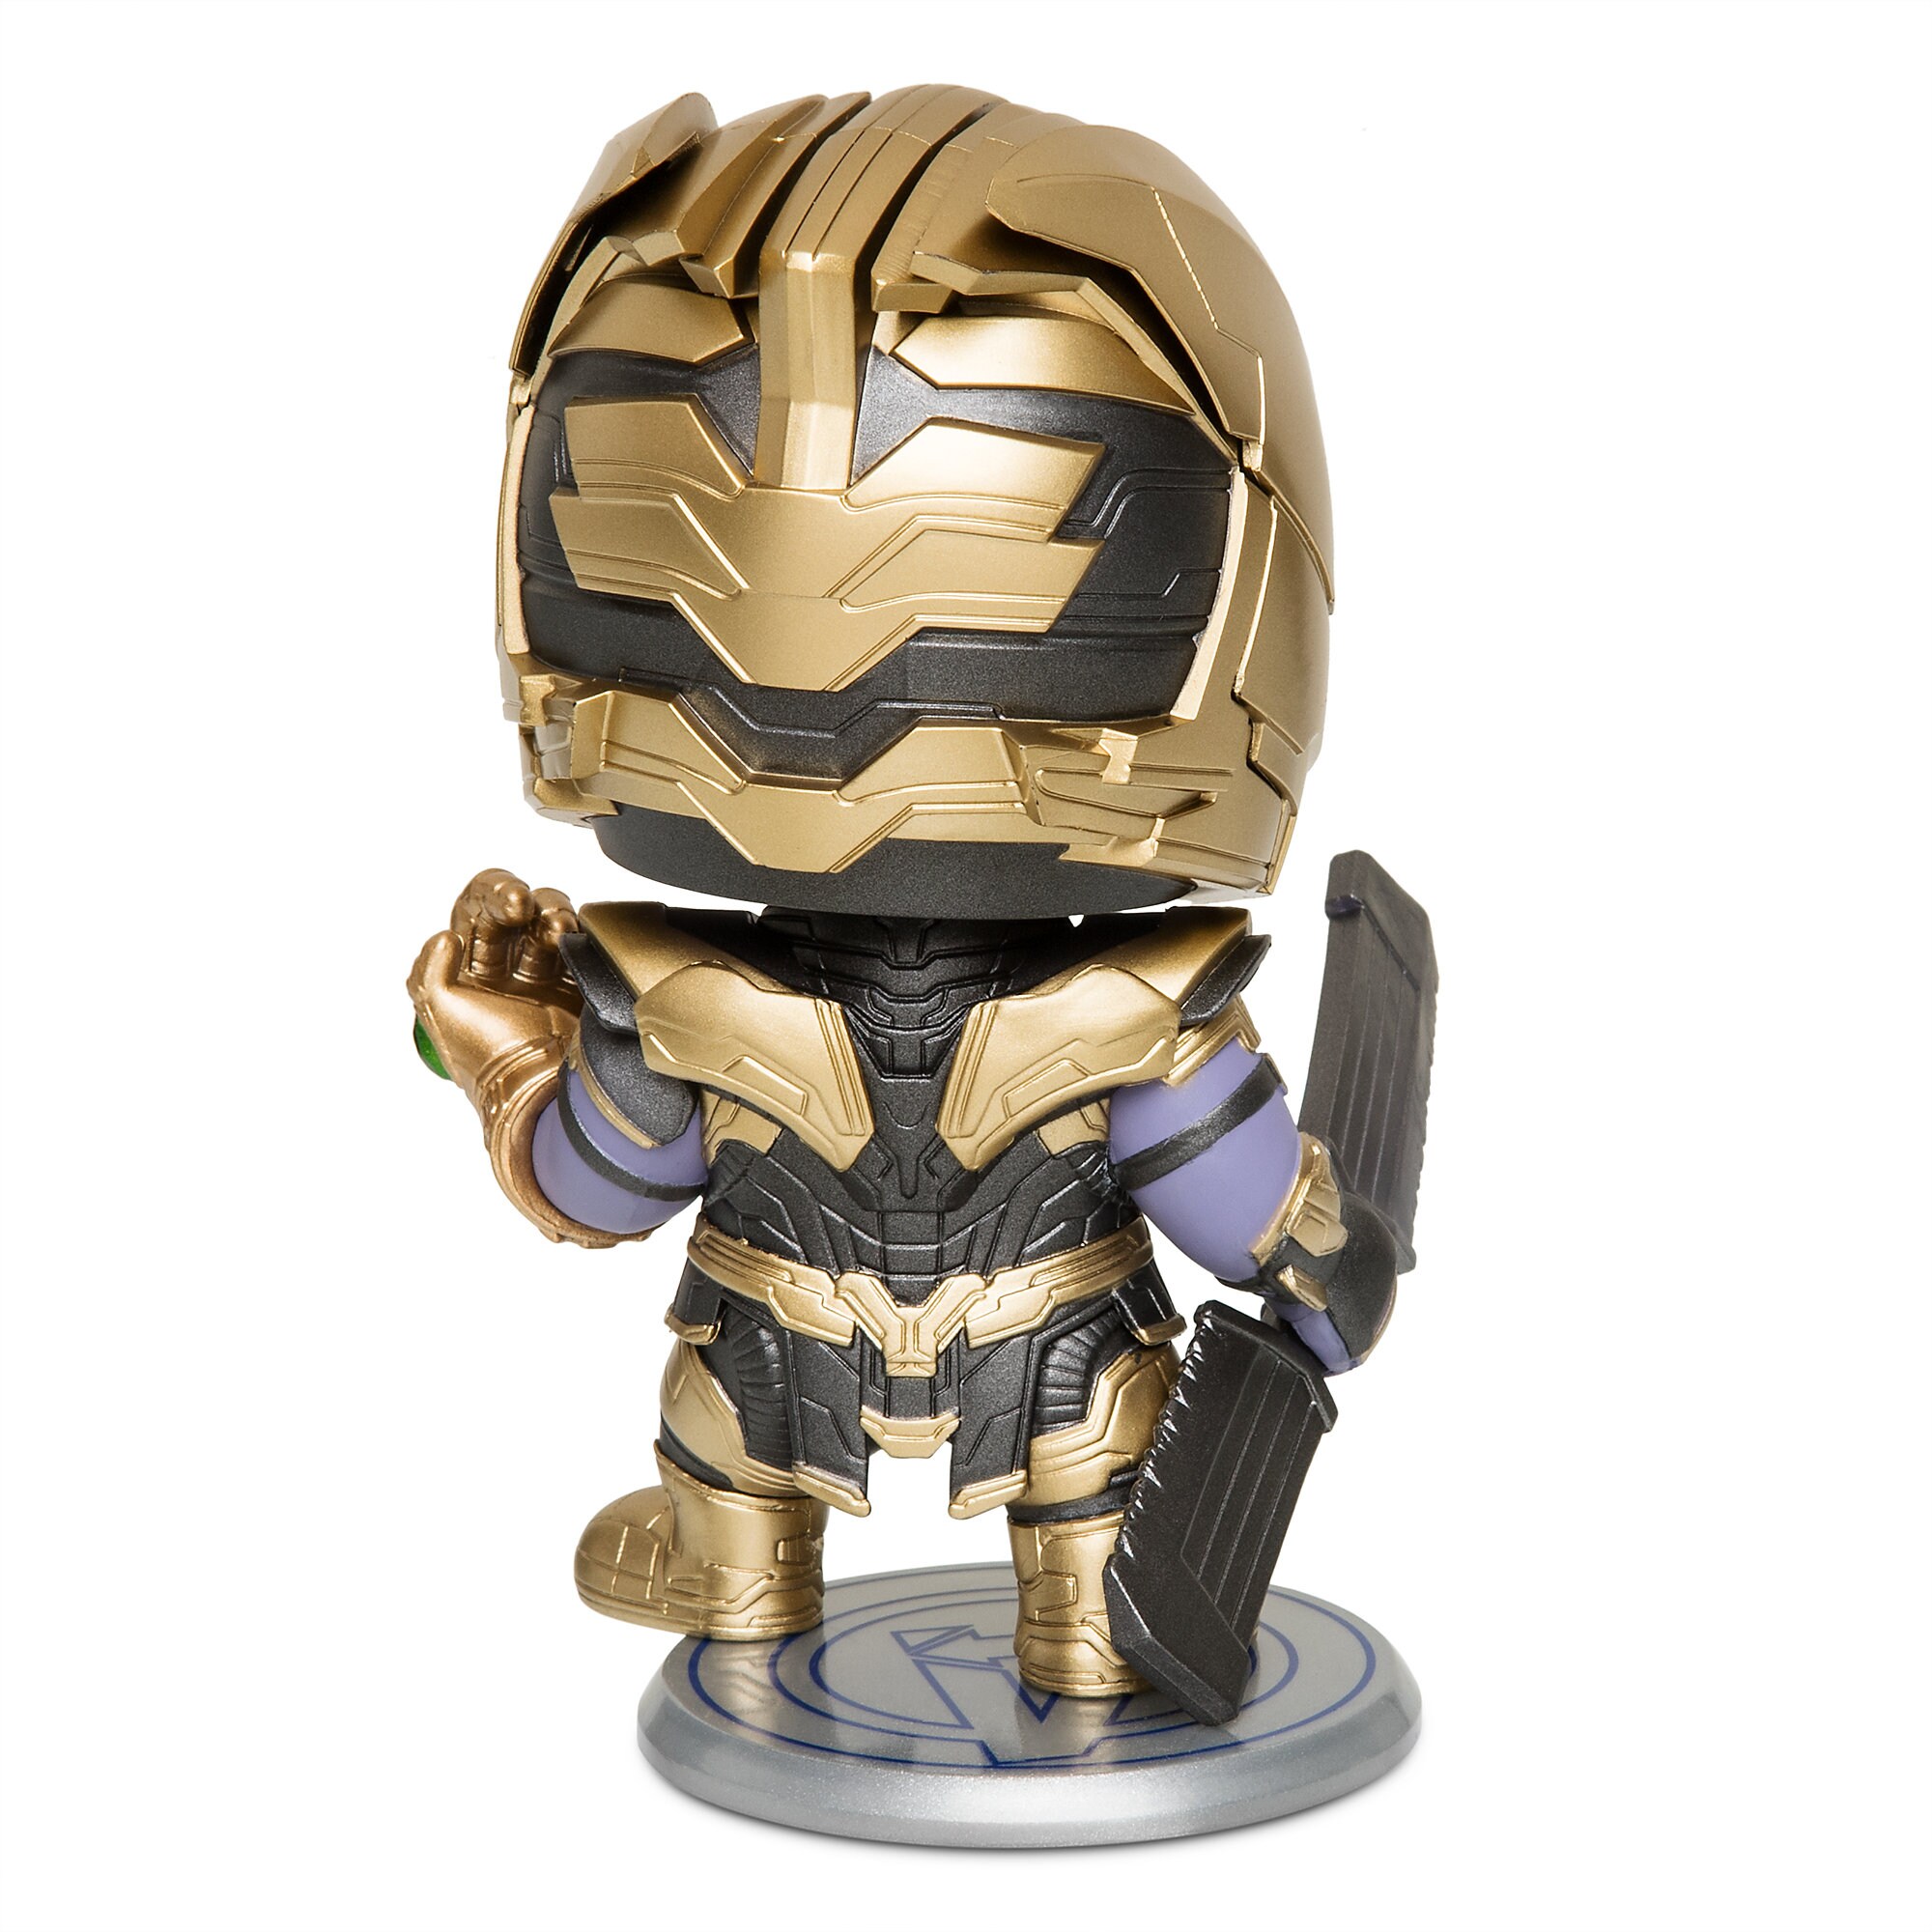 Thanos Cosbaby Bobble-Head Figure by Hot Toys - Marvel's Avengers: Endgame